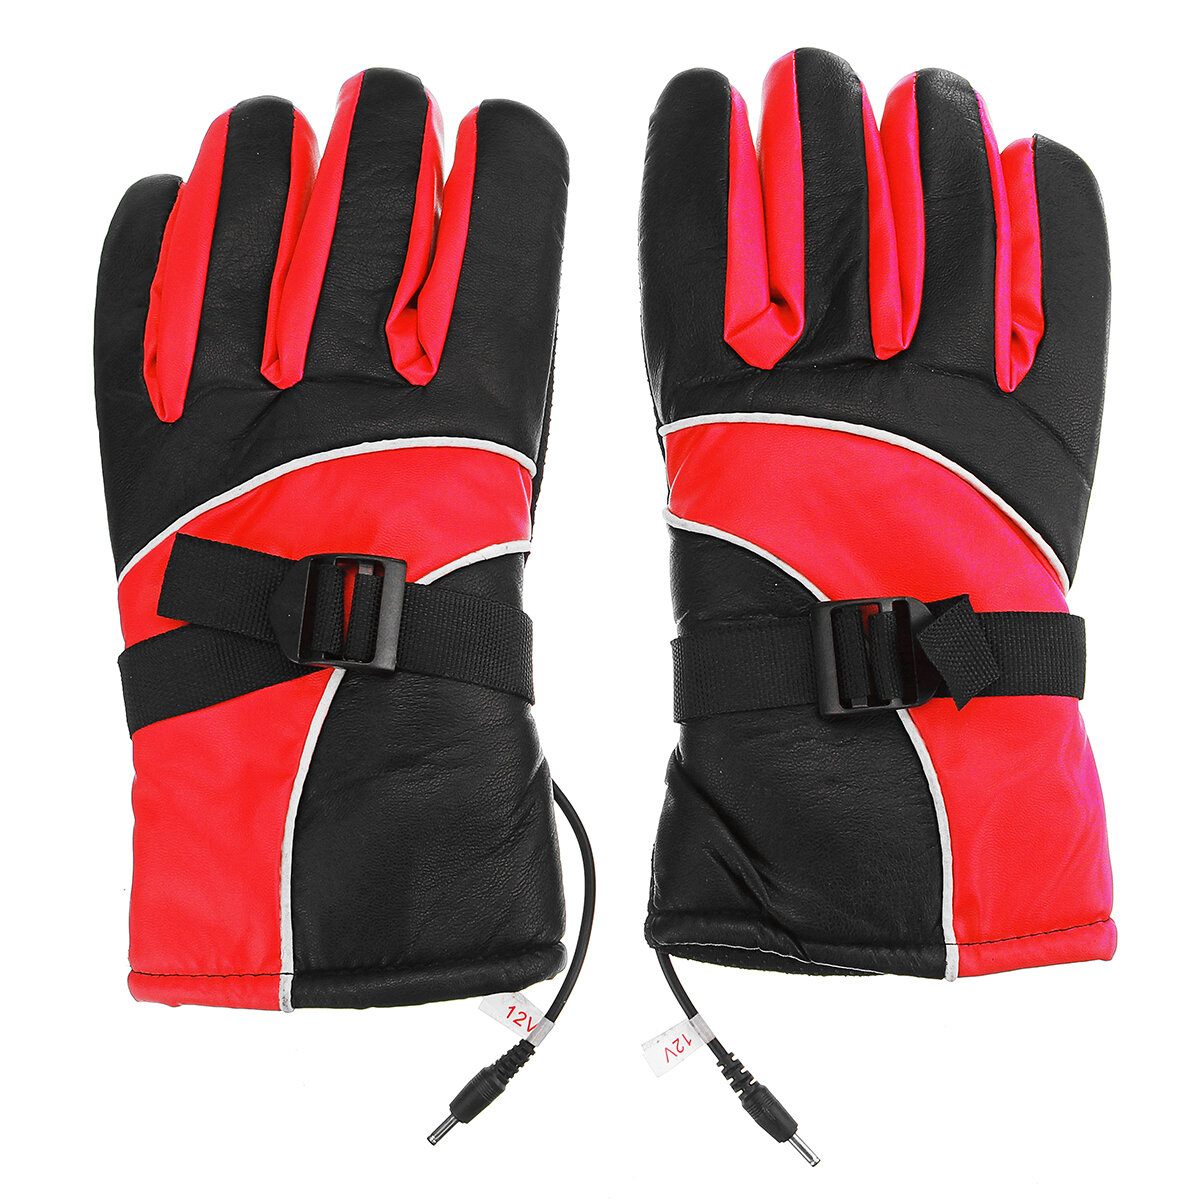 

12V/48V Electric Heated Glove Warm Waterproof Gloves Winter Motorcycle Motorbike Riding Outdoor Thermal Equipment